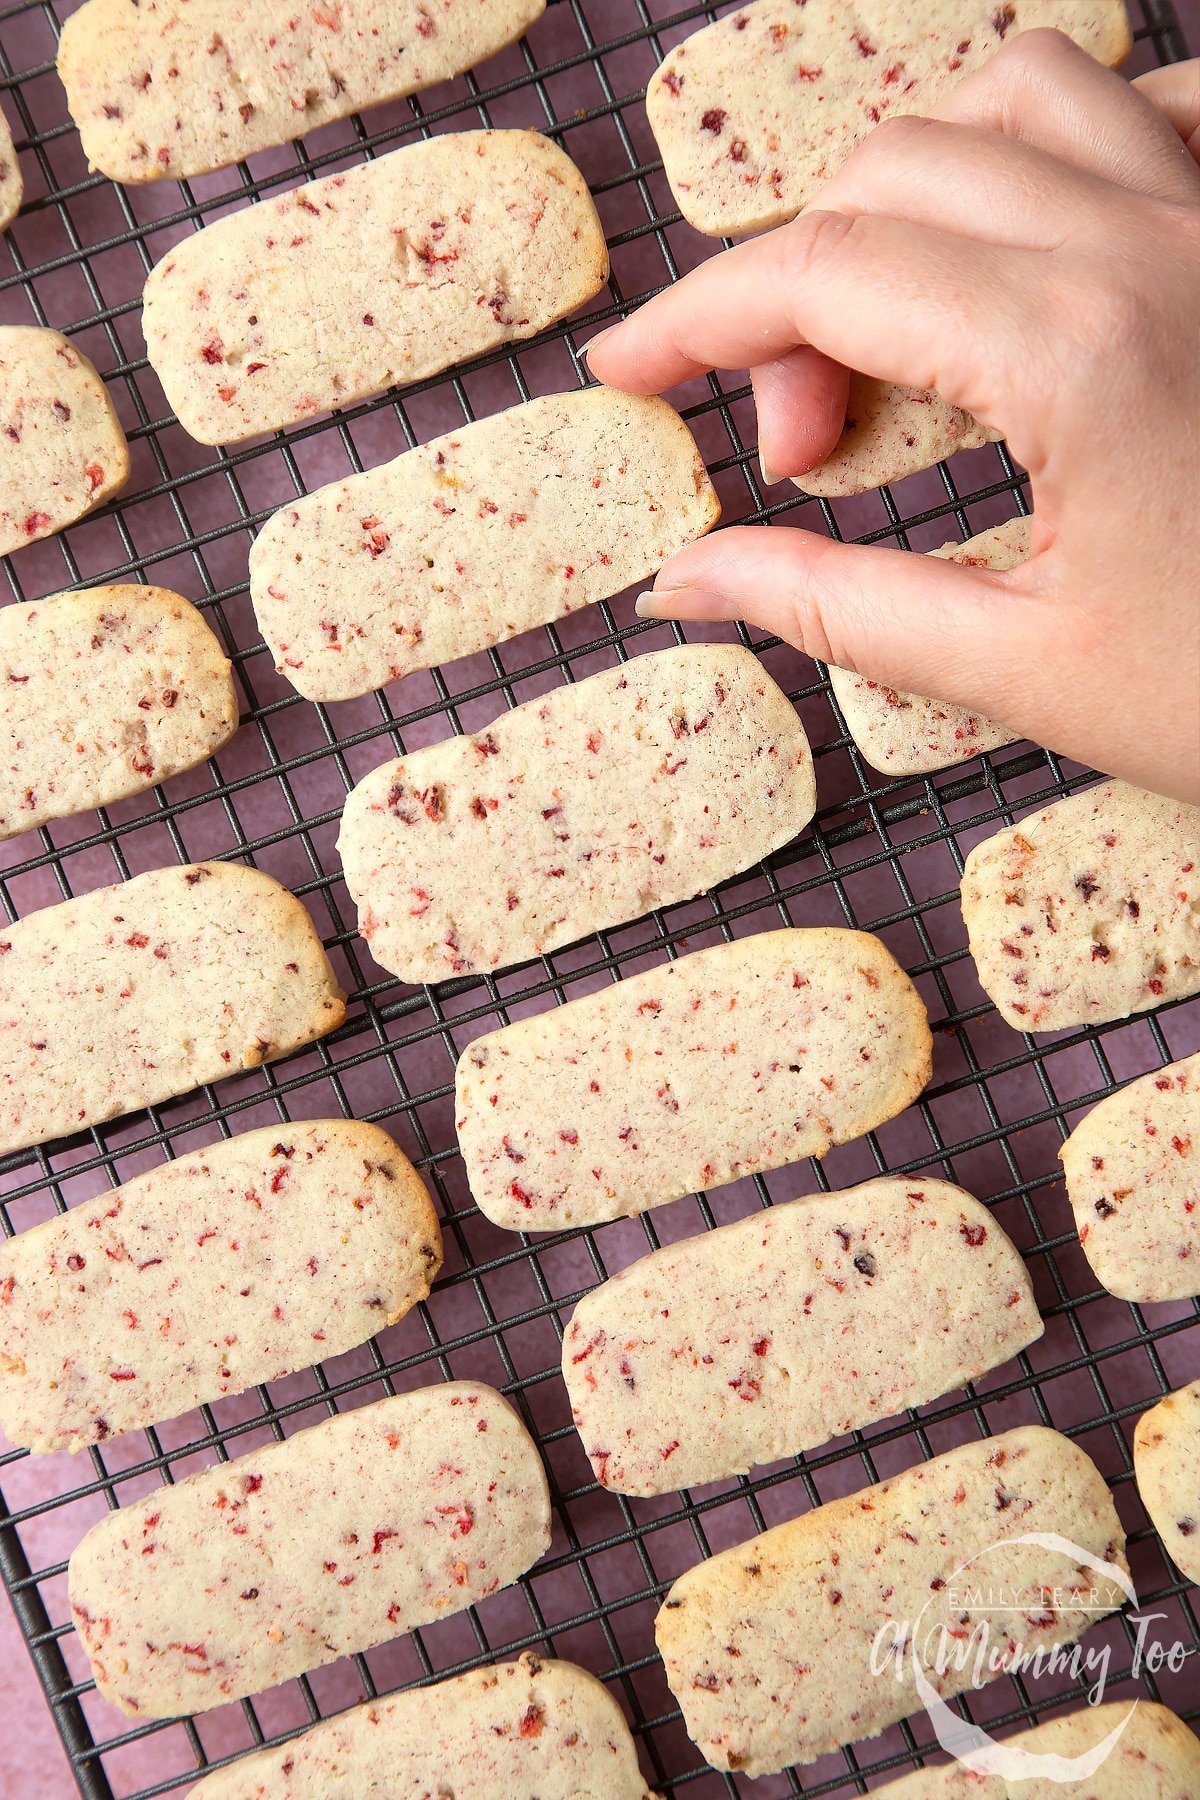 Strawberry biscuits on a cooling rack. Hand going in to pick one up.